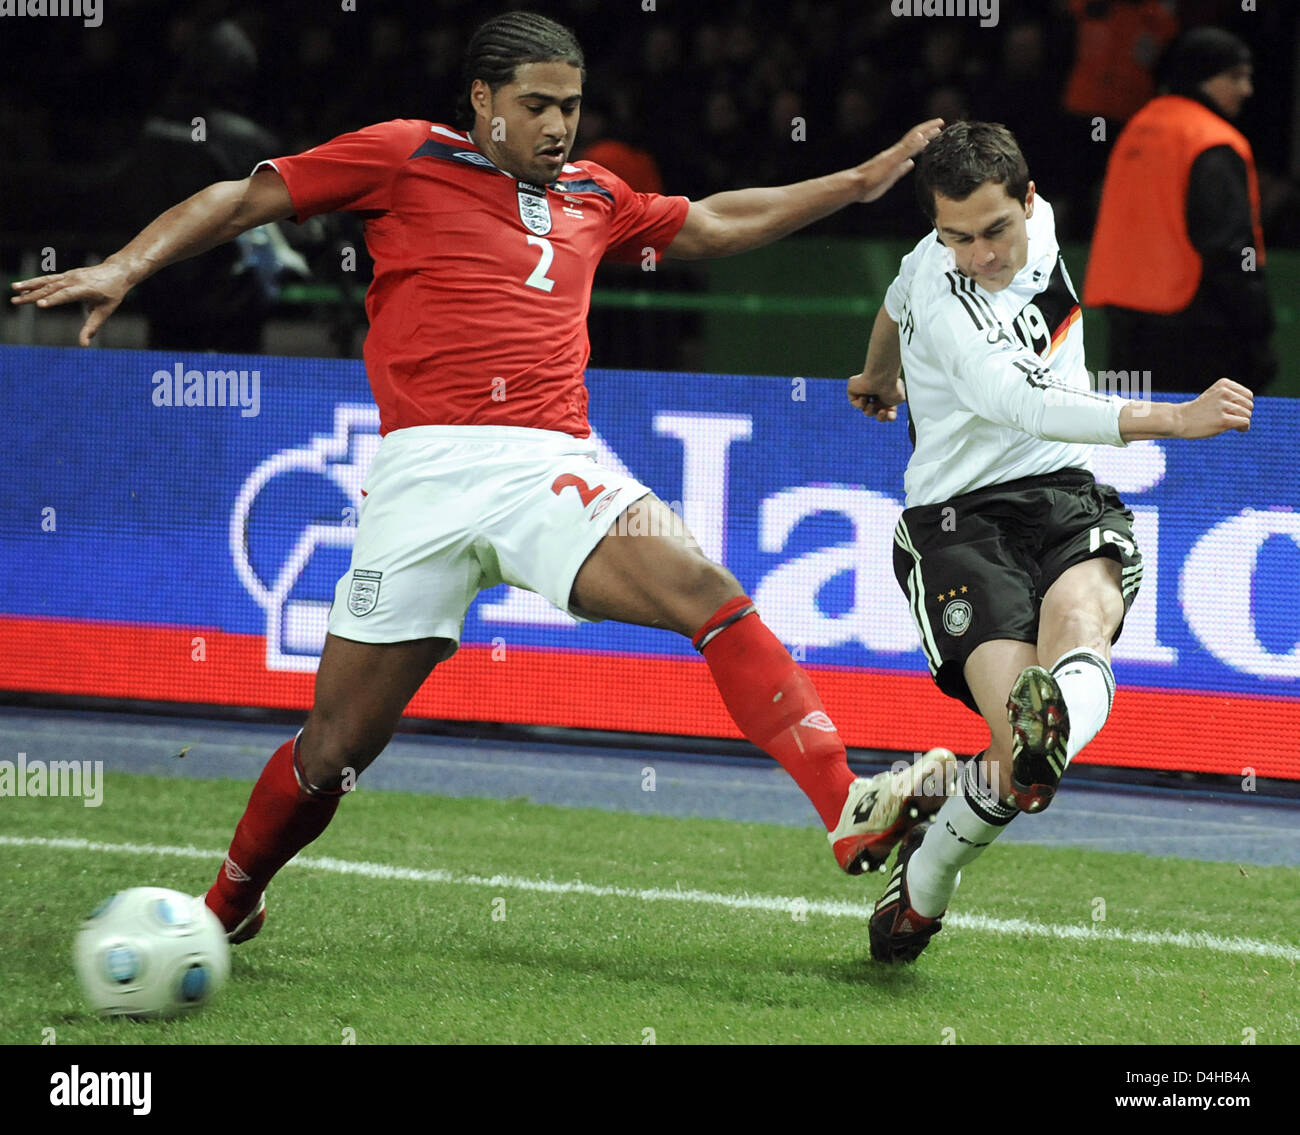 Germany?s Marcel Schaefer (R) brings the cross past England?s Glen Johnson (L) during their friendly match at Olympi stadium in Berlin, Germany, 19 November 2008. England defeated Germany 2-1. Photo: Jochen Luebke Stock Photo